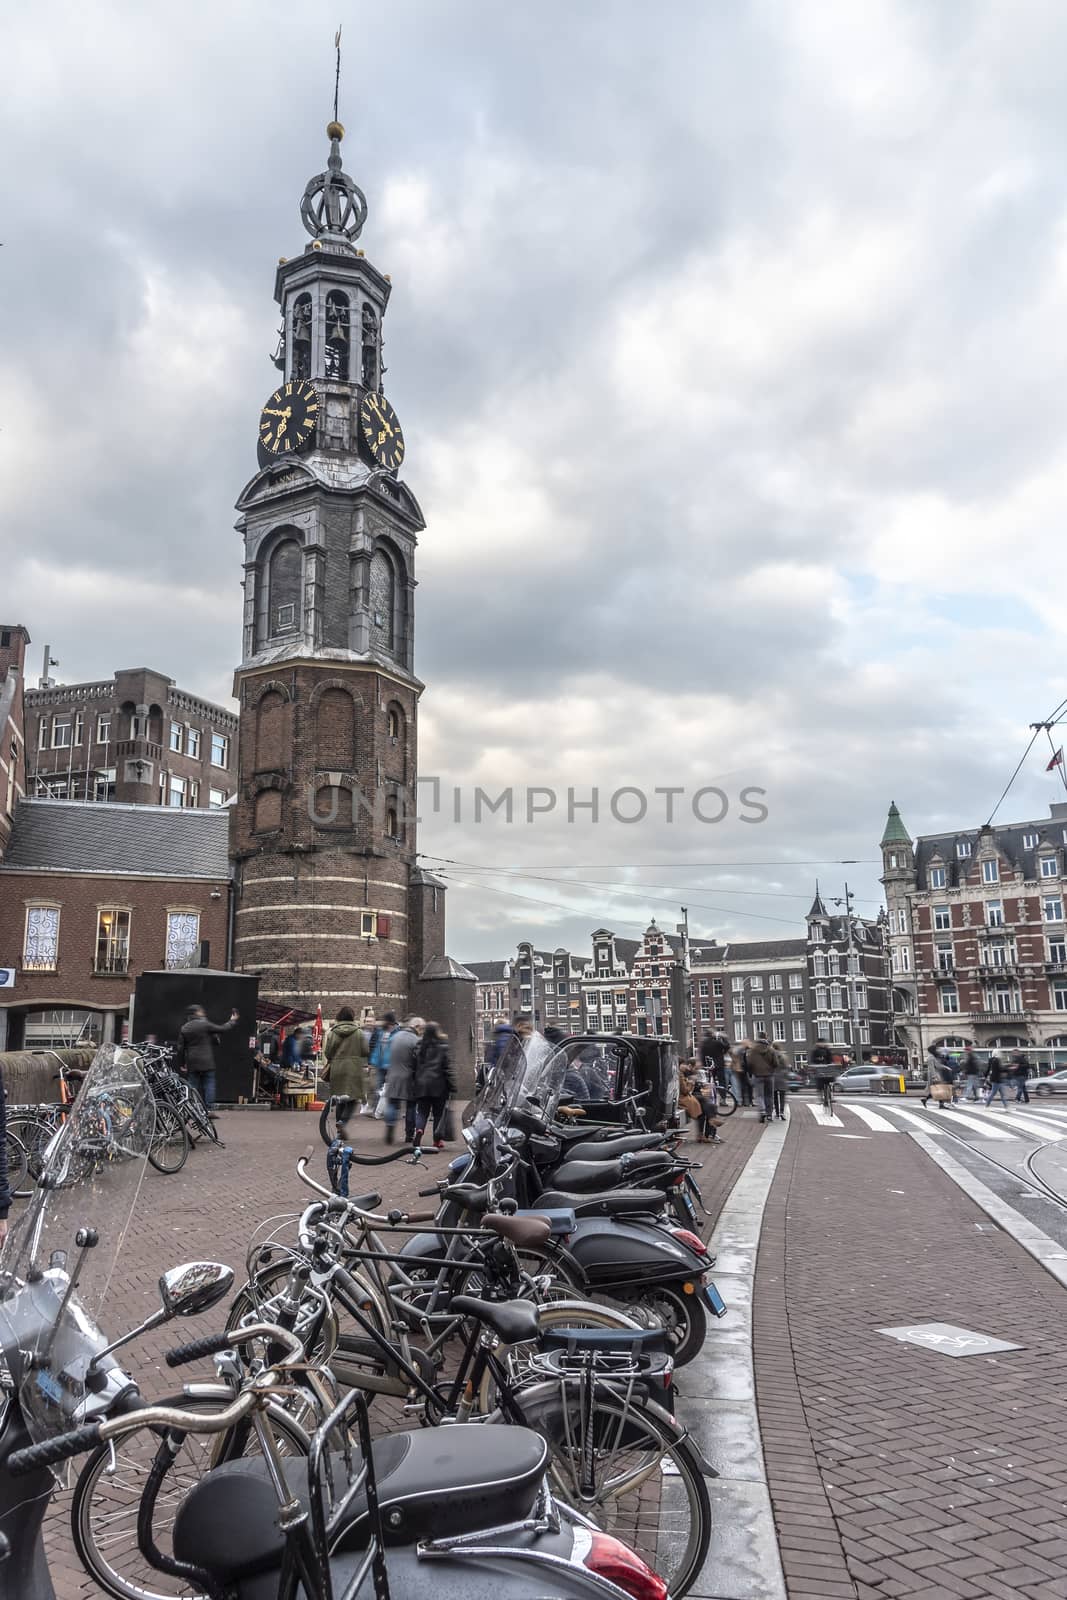 AMSTERDAM, 31 March 2018 - View of the originally part of the Amsterdam wall. This  tower (Munttoren in Dutch) was rebuilt in 1620 & features a carillon with bells. by ankorlight